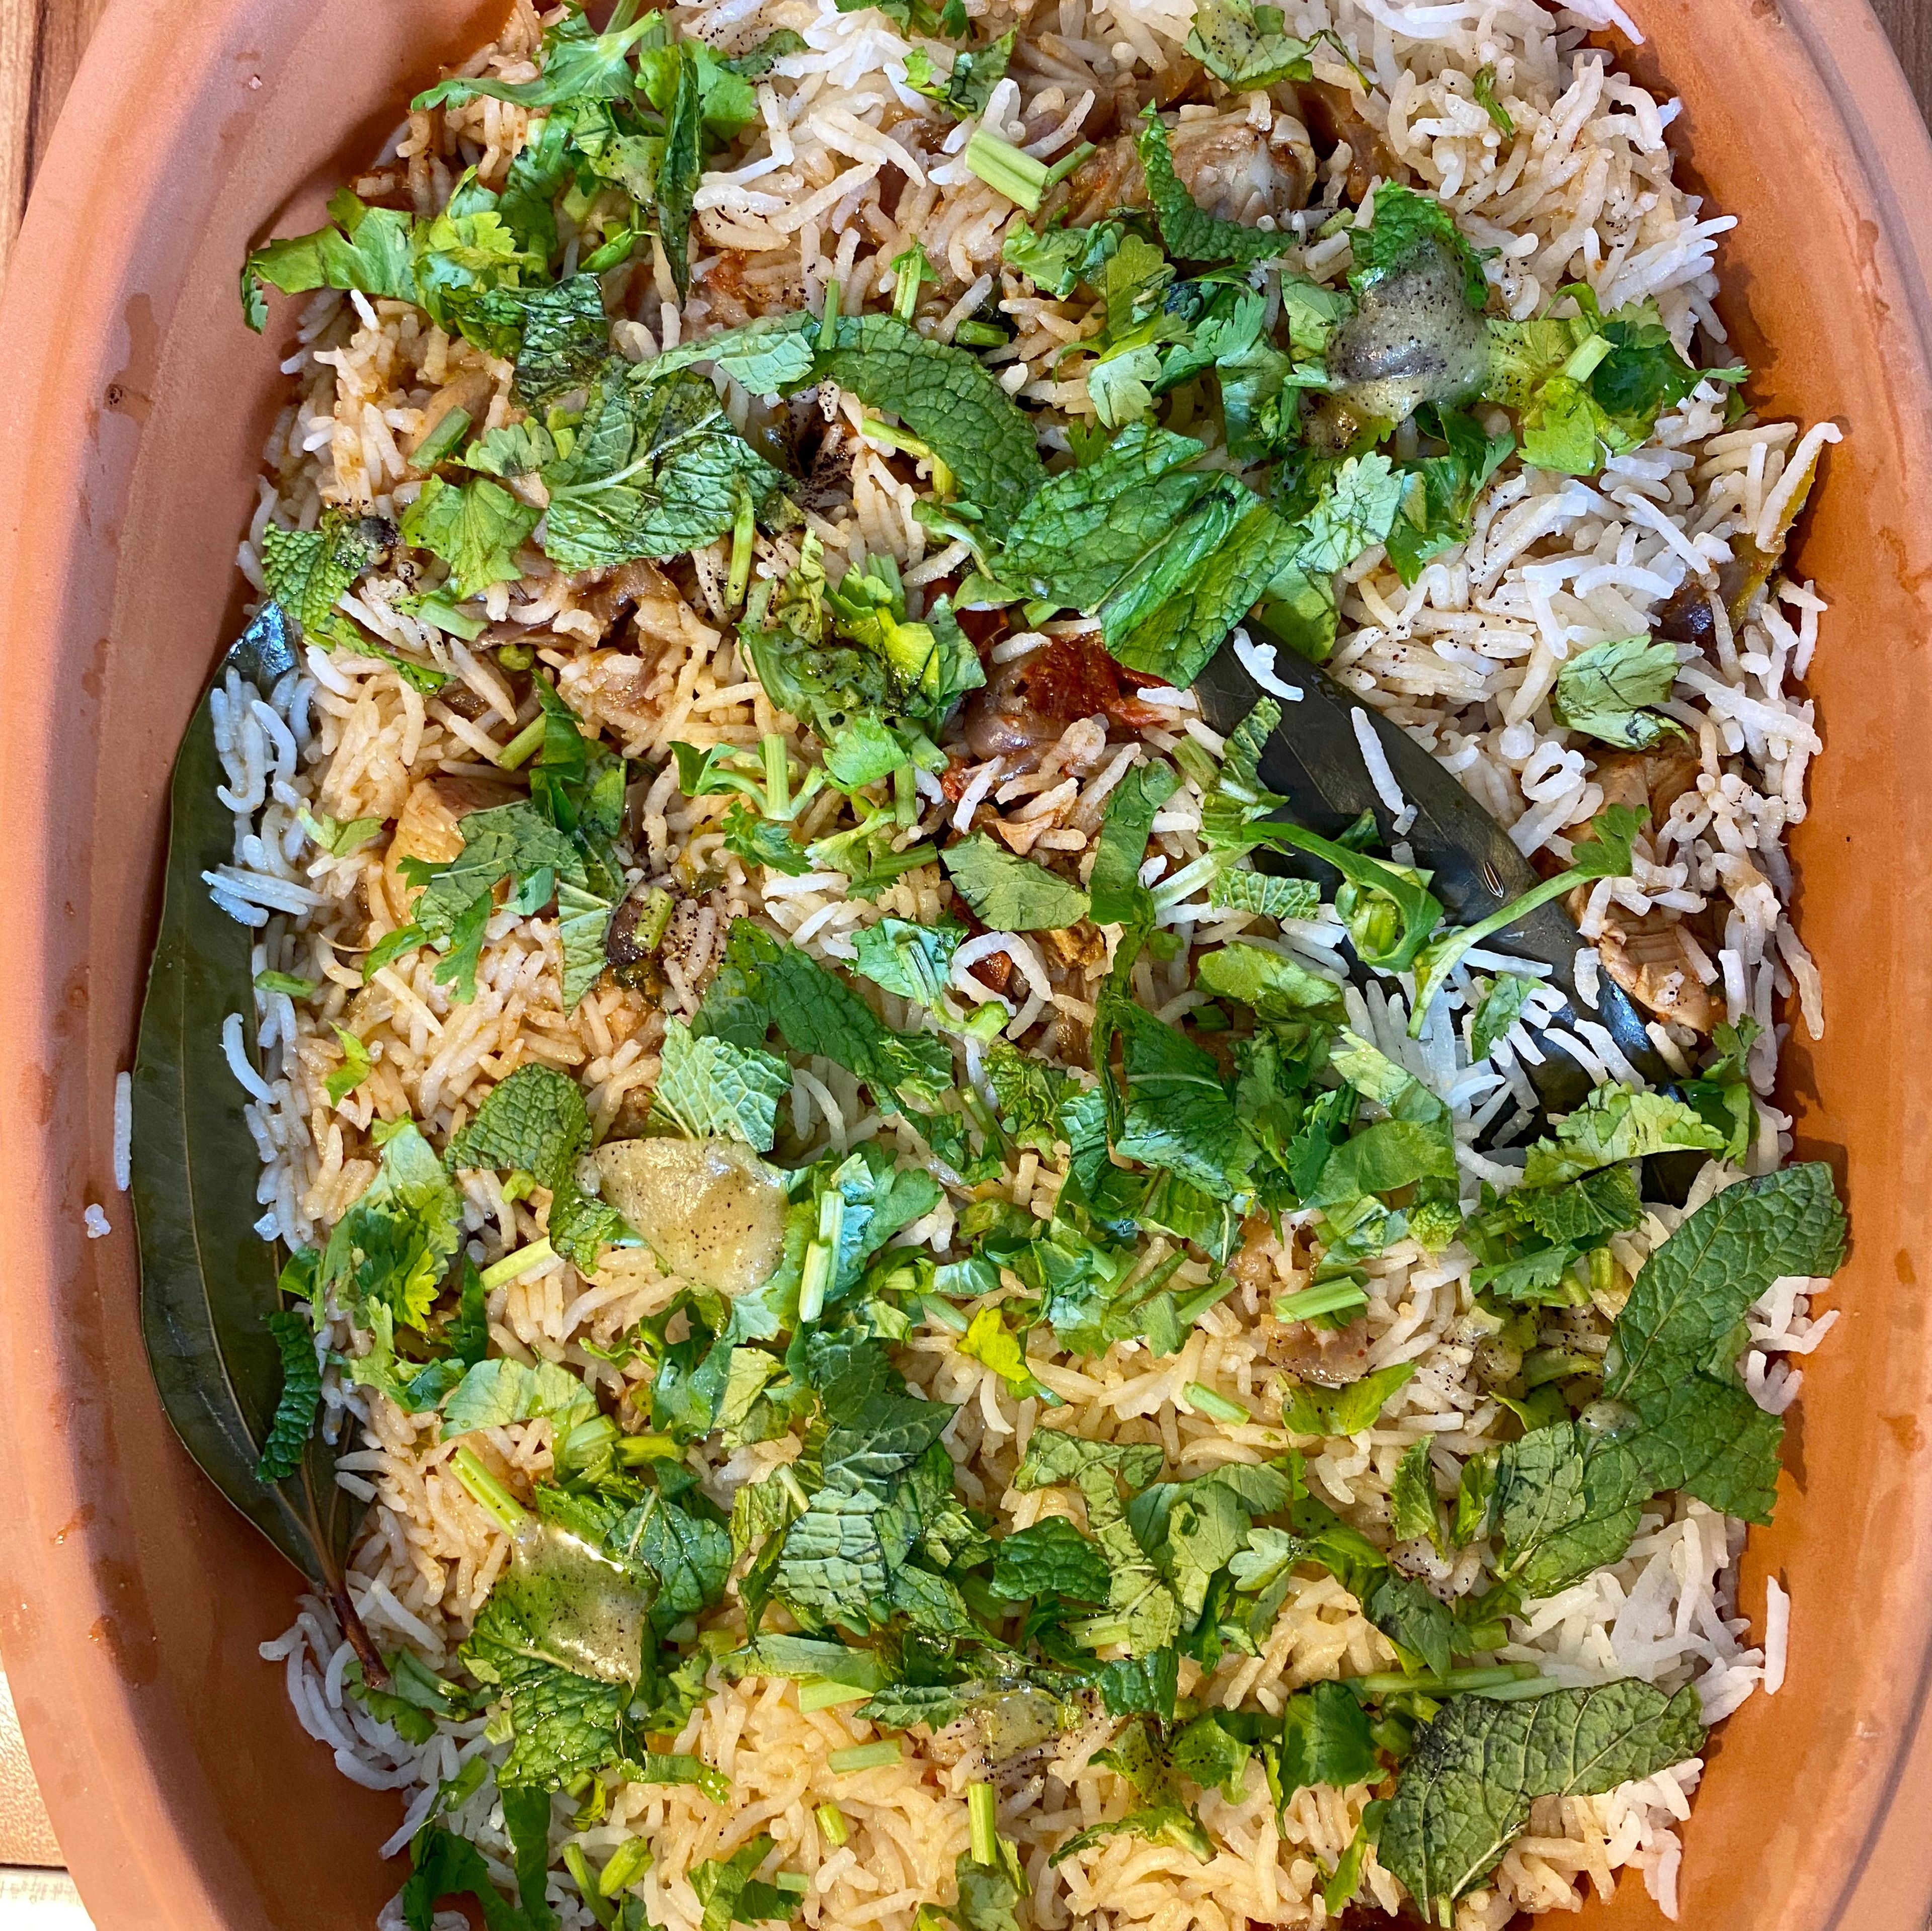 Making the biryani!! - Almost there! Add the curry base to a large empty casserole.  To this, add the rice on top and garnish with coriander and mint leaves. Layer the top with the ghee , rose water and jasmine water. Place the pot in the oven for 25 mins at 225 and 12 mins in 200. Take out the casserole and leave it aside for 10 minutes. There you go! The biryani is ready to be served. Have a feast! 